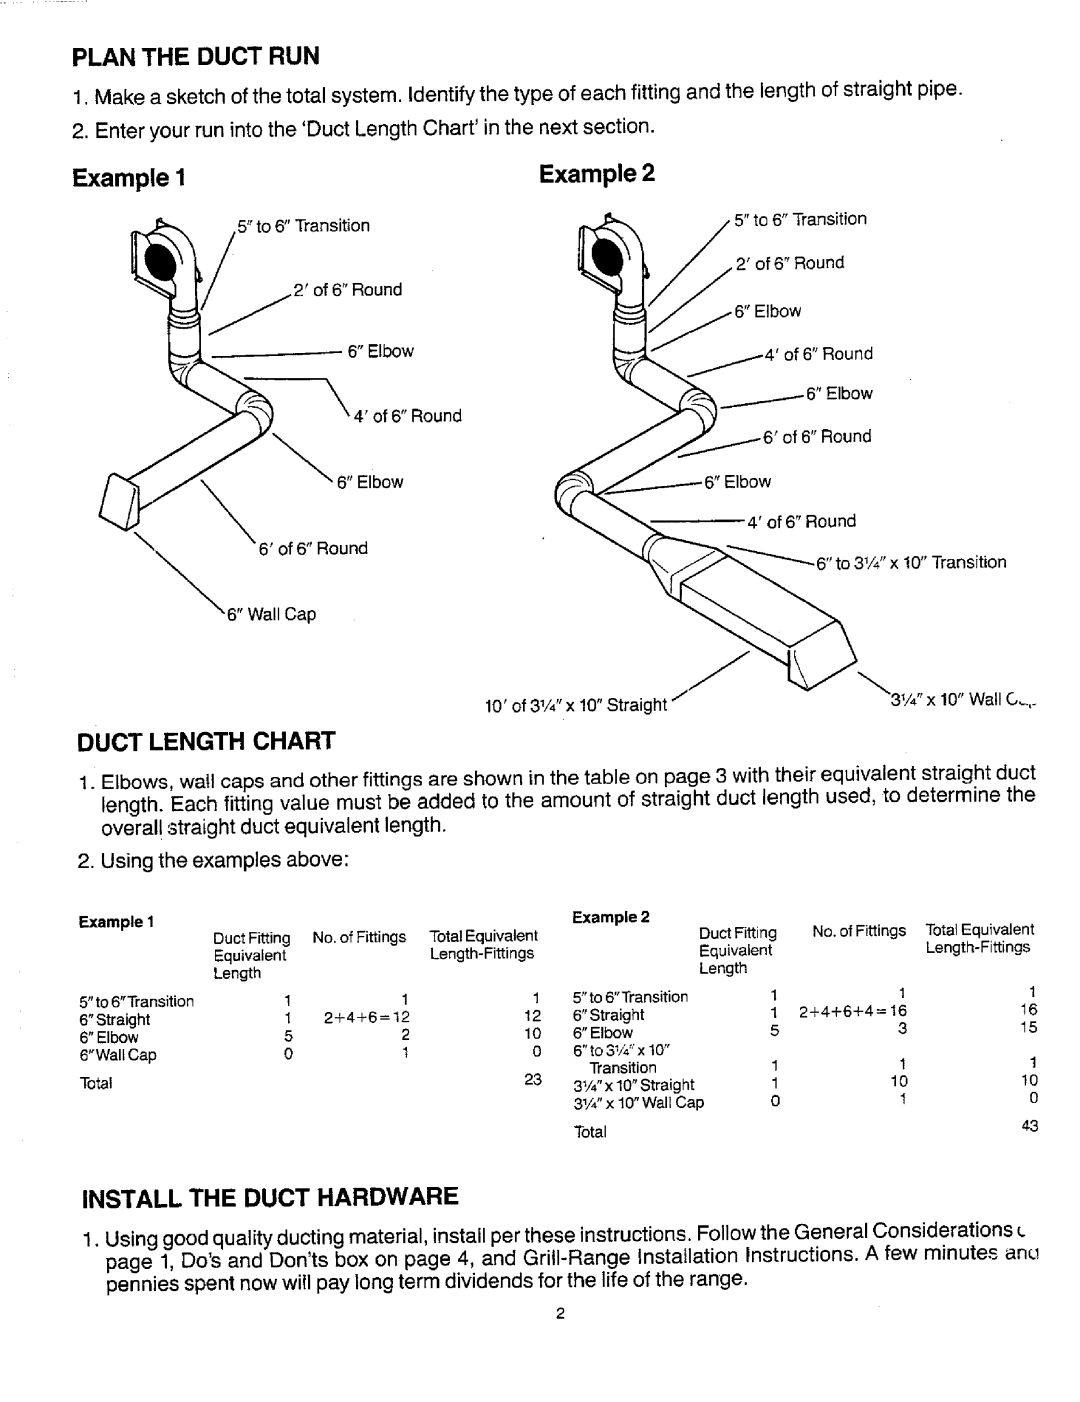 Jenn-Air SCE30500, SVE47100, SCE30600 dimensions Plan The Duct Run, Duct Length Chart, Install The Duct Hardware 